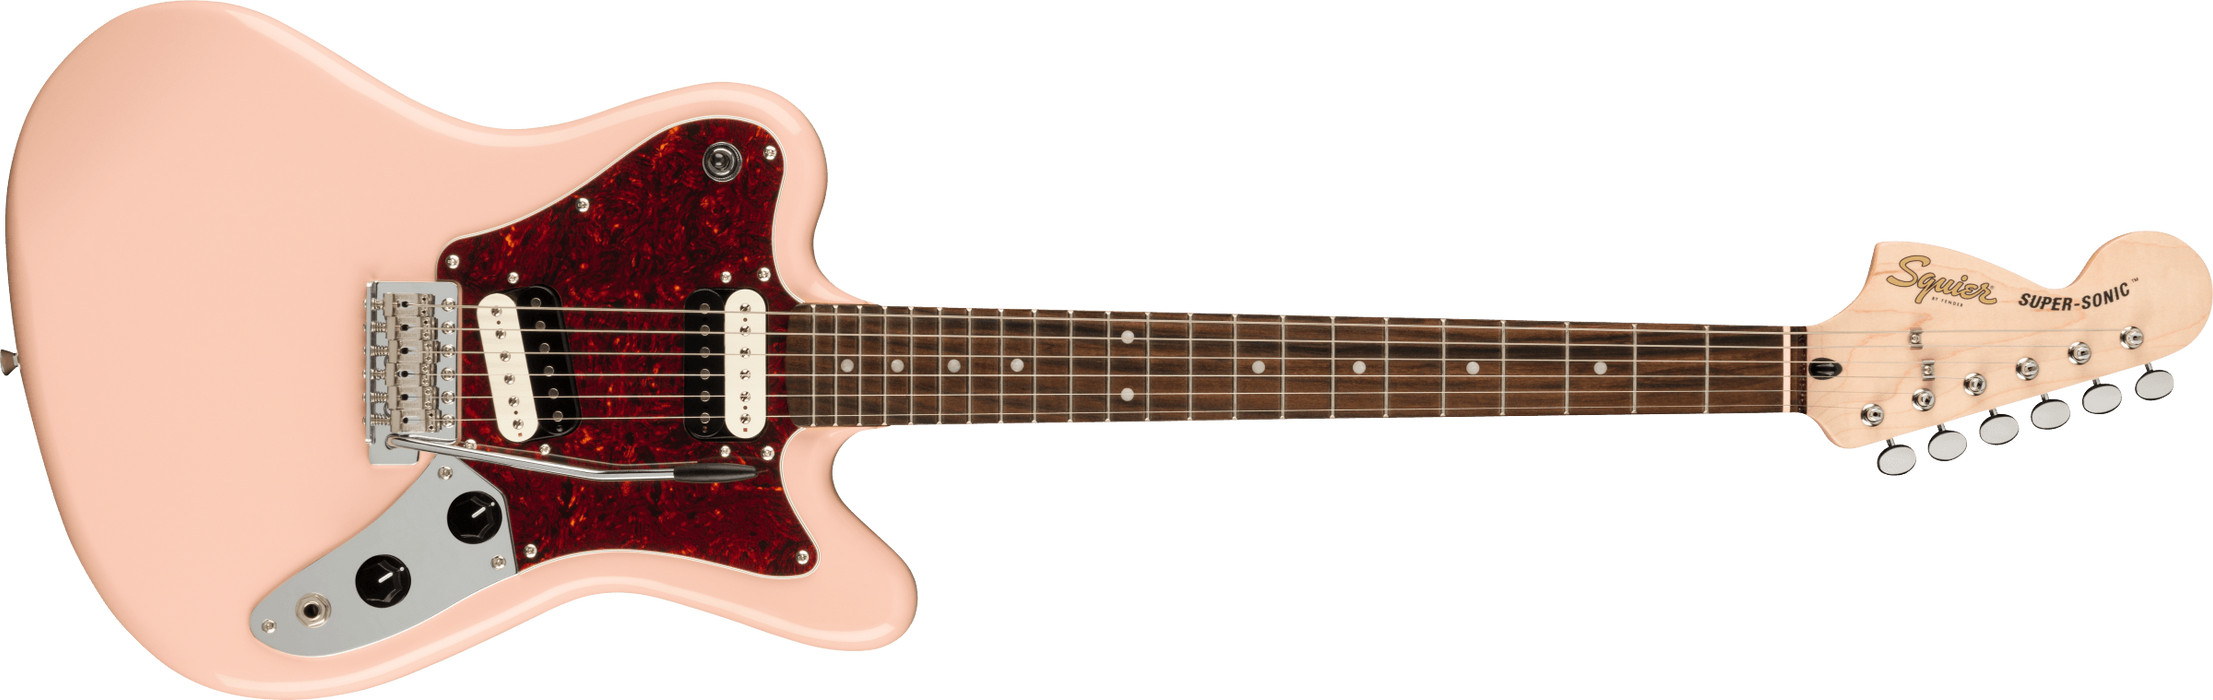 Squier Paranormal Super-Sonic LRL TSPG Electric Guitar - Shell Pink